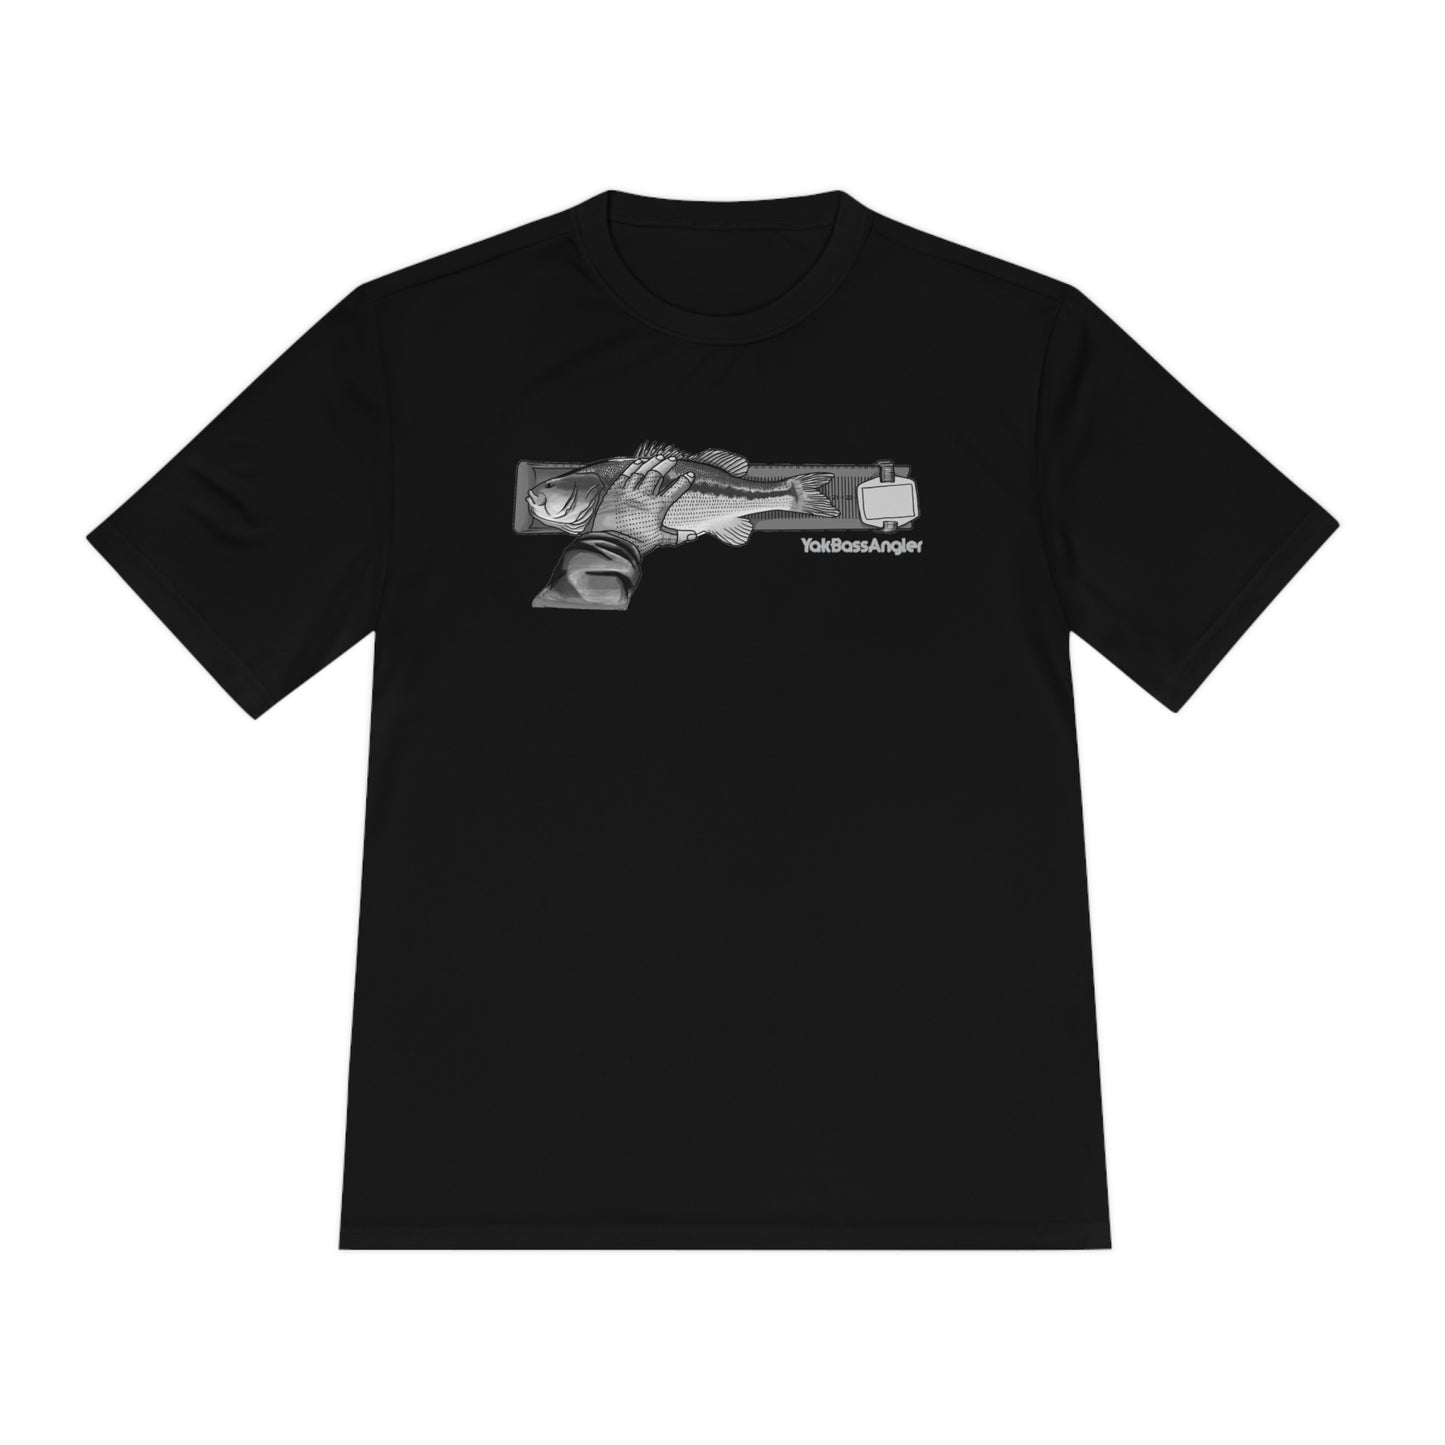 Performance T-Shirt - The Cull